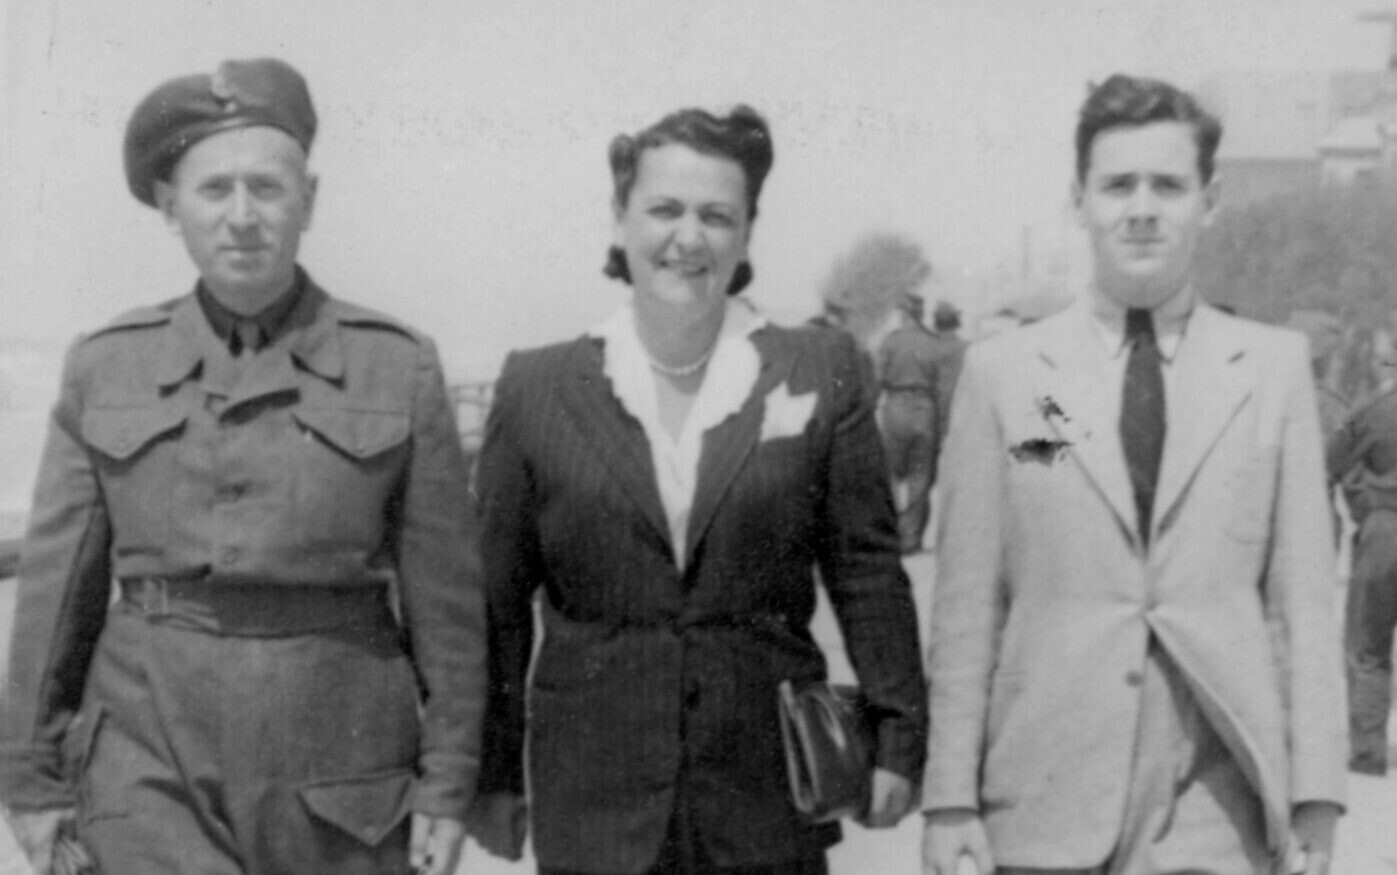 Caught between Hitler and Stalin, one family's miraculous tale of survival